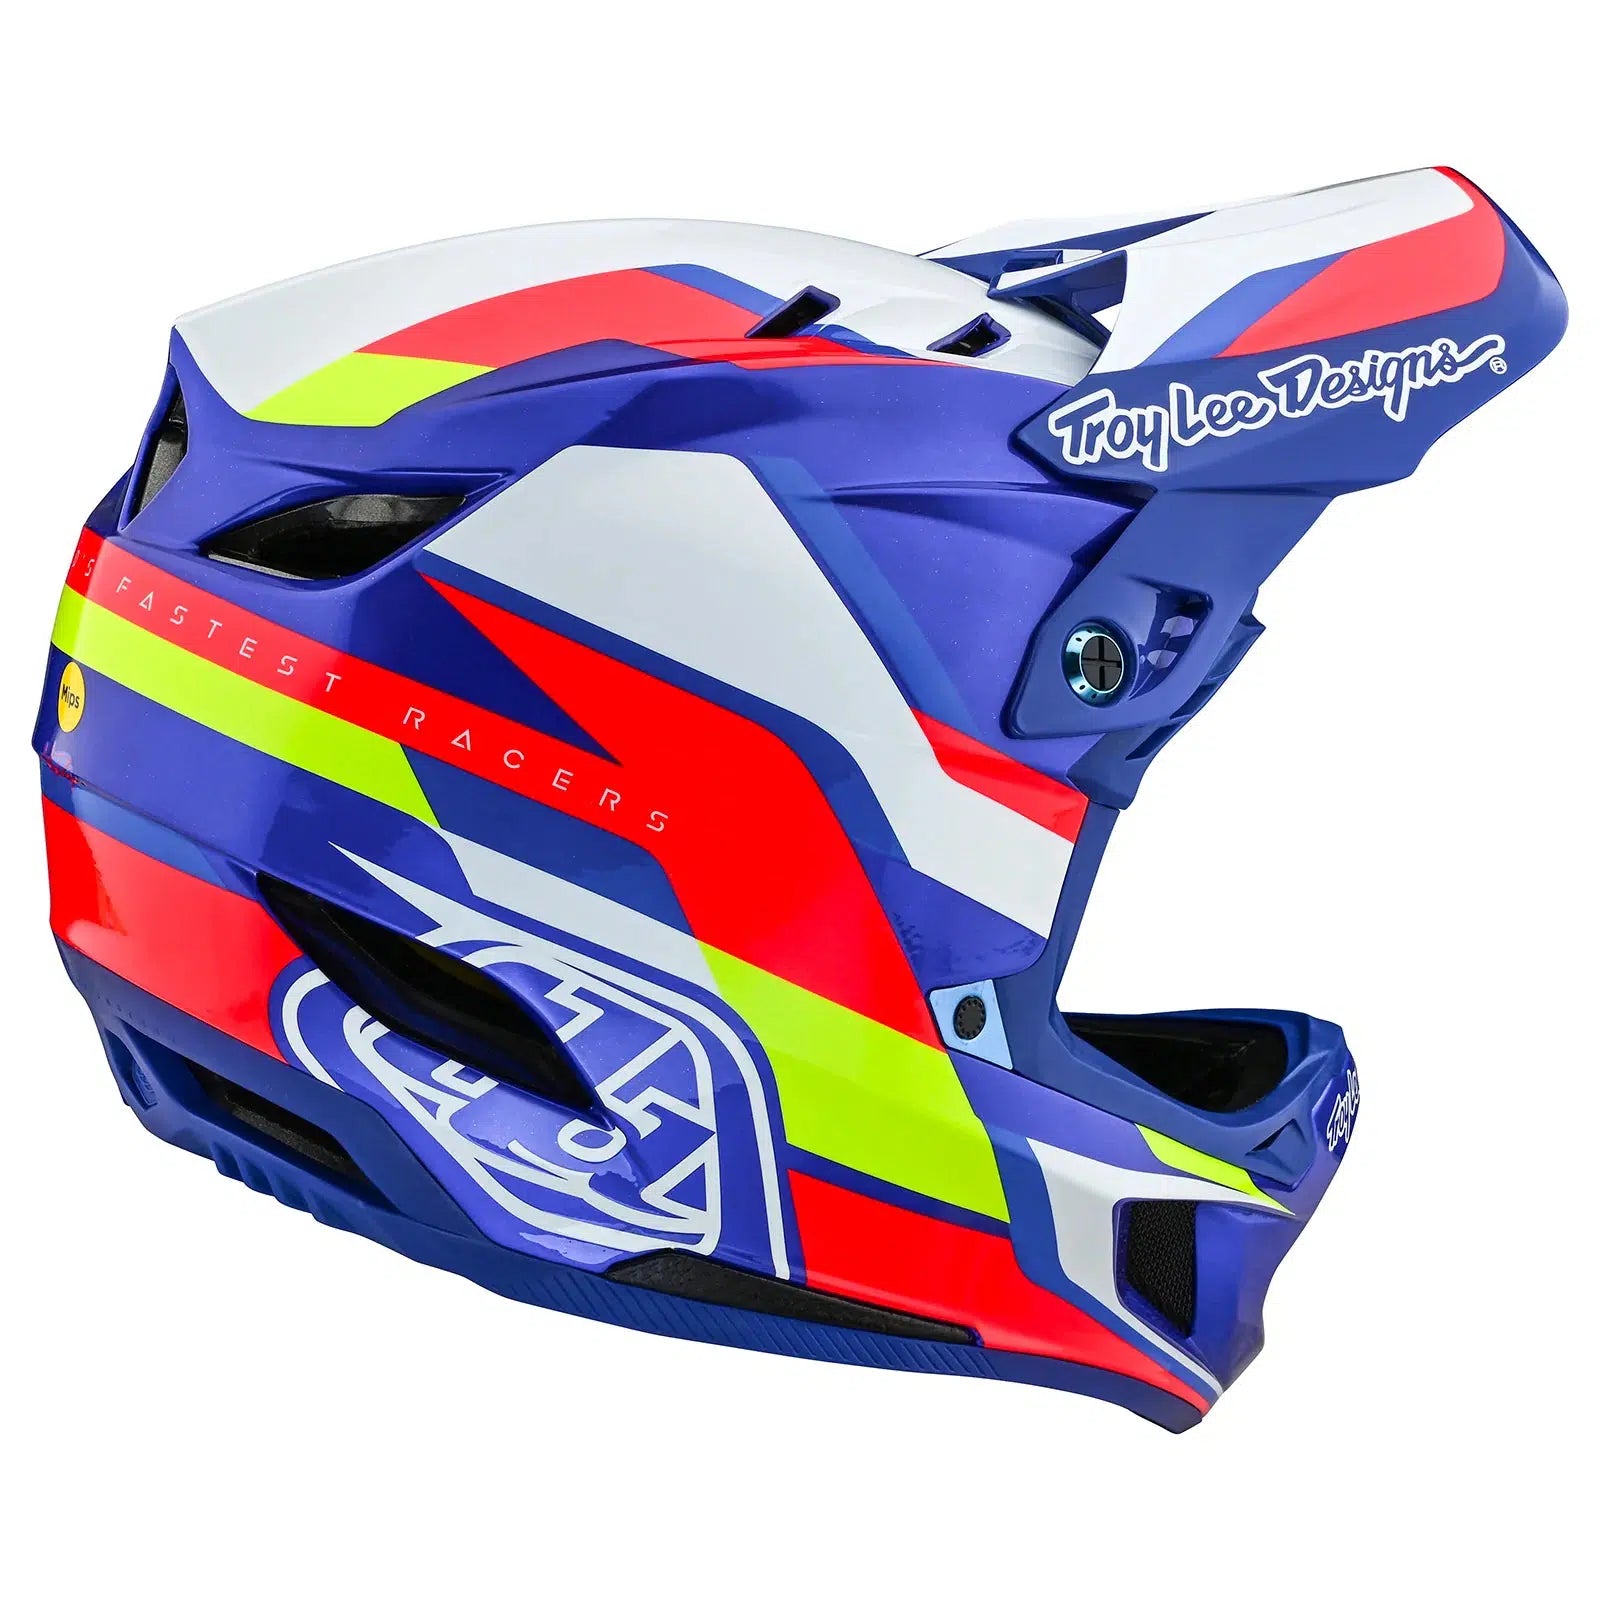 A TLD D4 AS Composite Helmet W/MIPS Omega Blue / White with a blue, yellow, and red design featuring the Mips protection system.